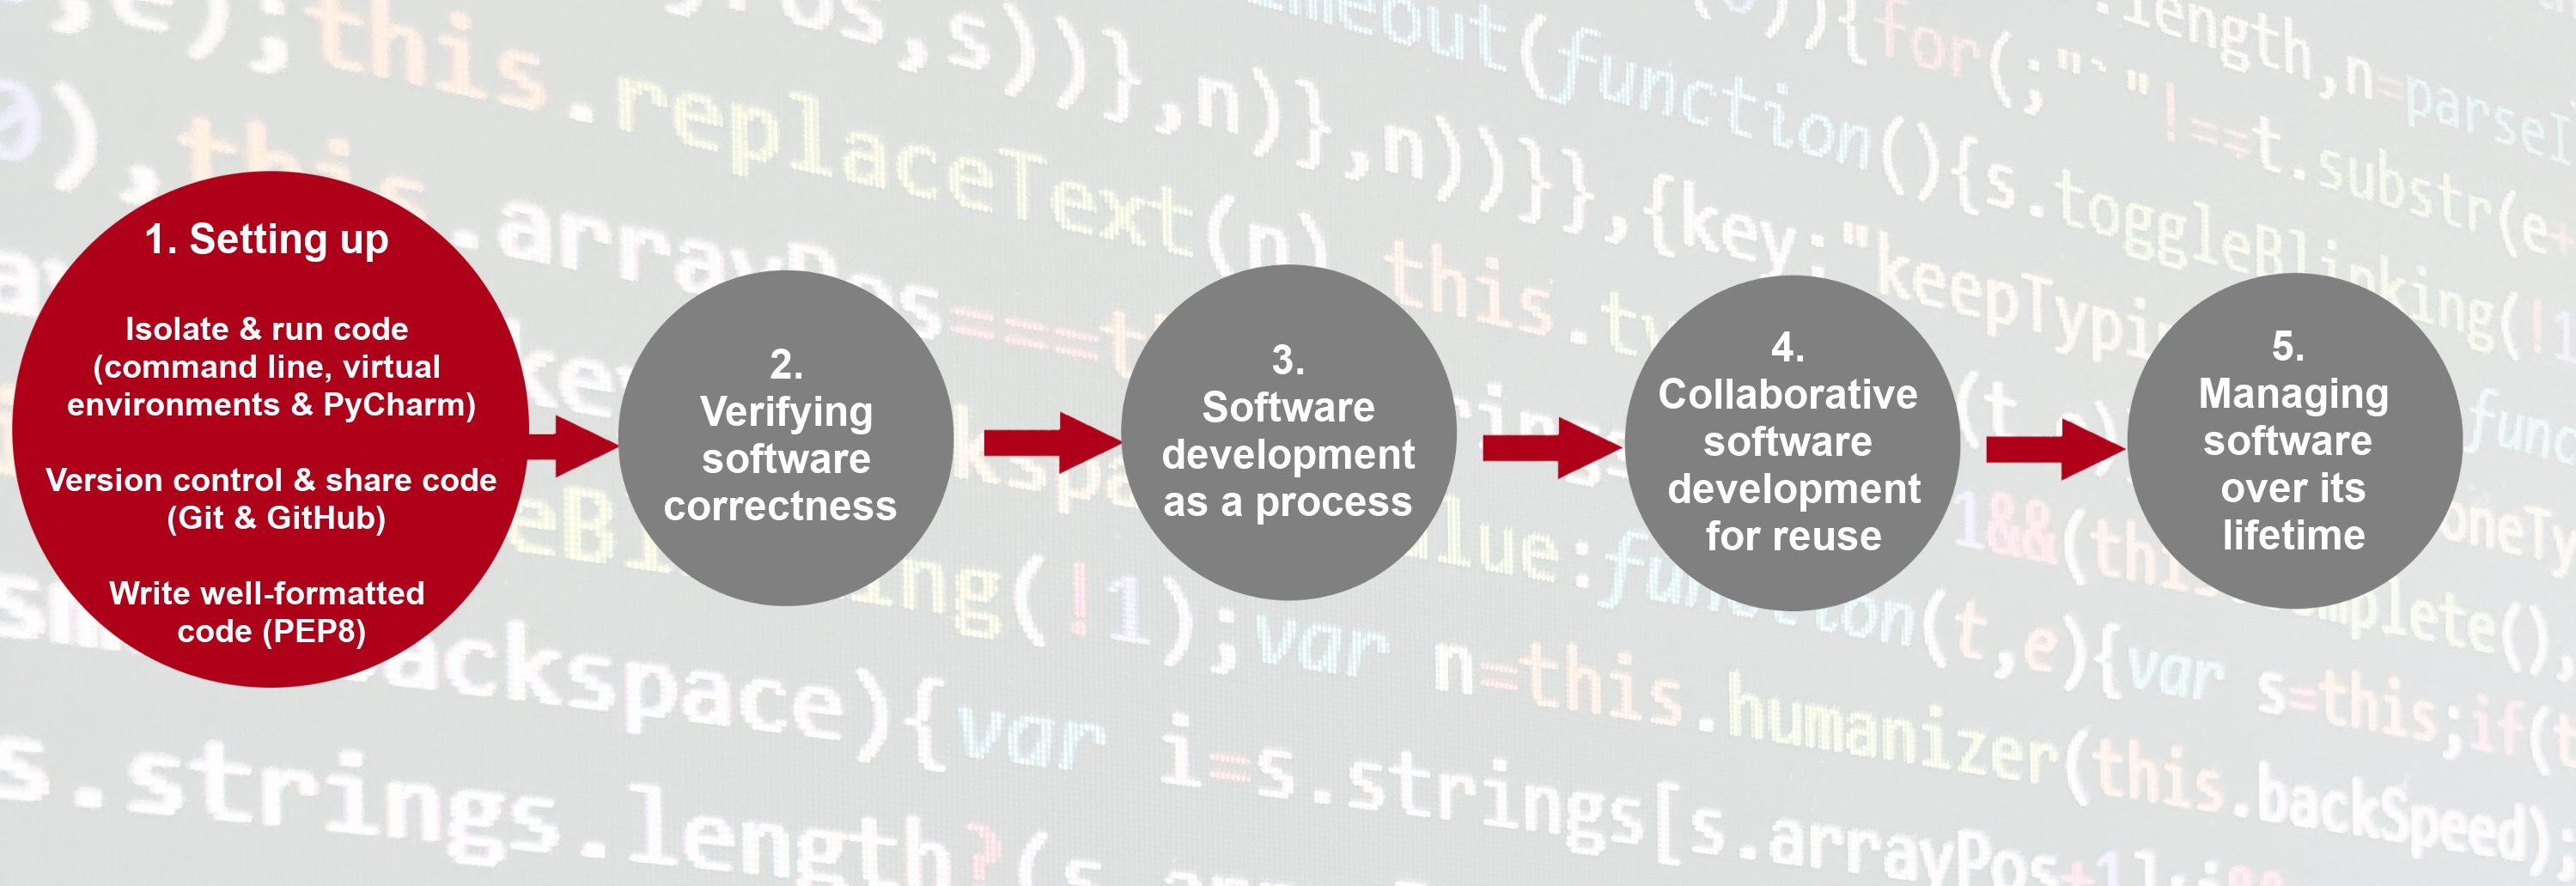 Tools needed to collaborate on code development effectively